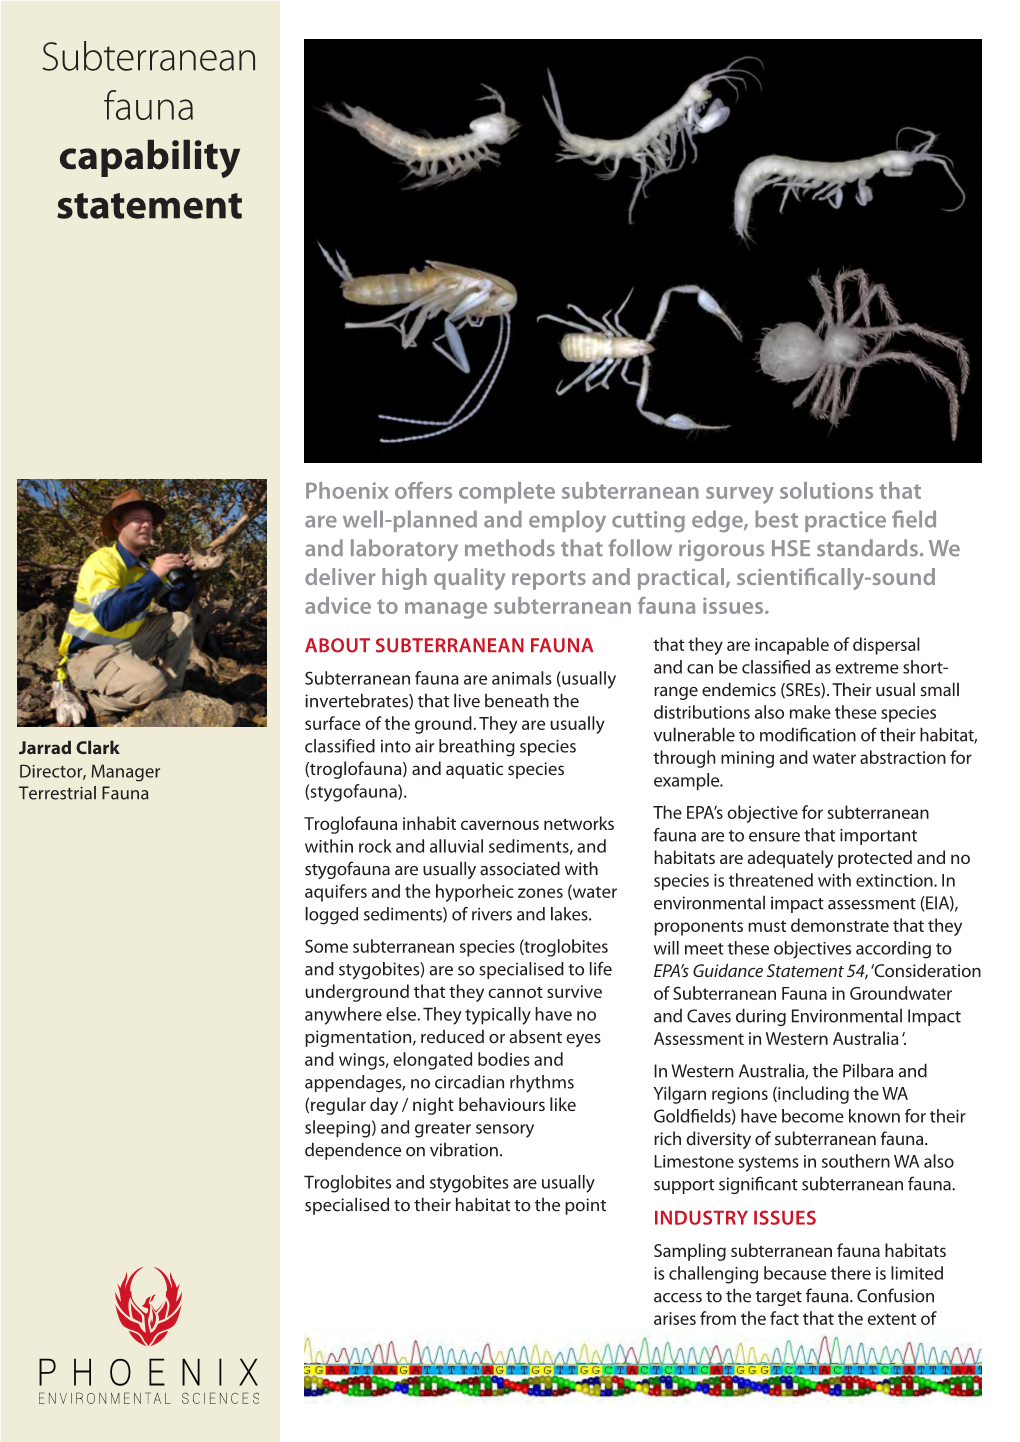 Download Our Subterranean Fauna Capability Statement